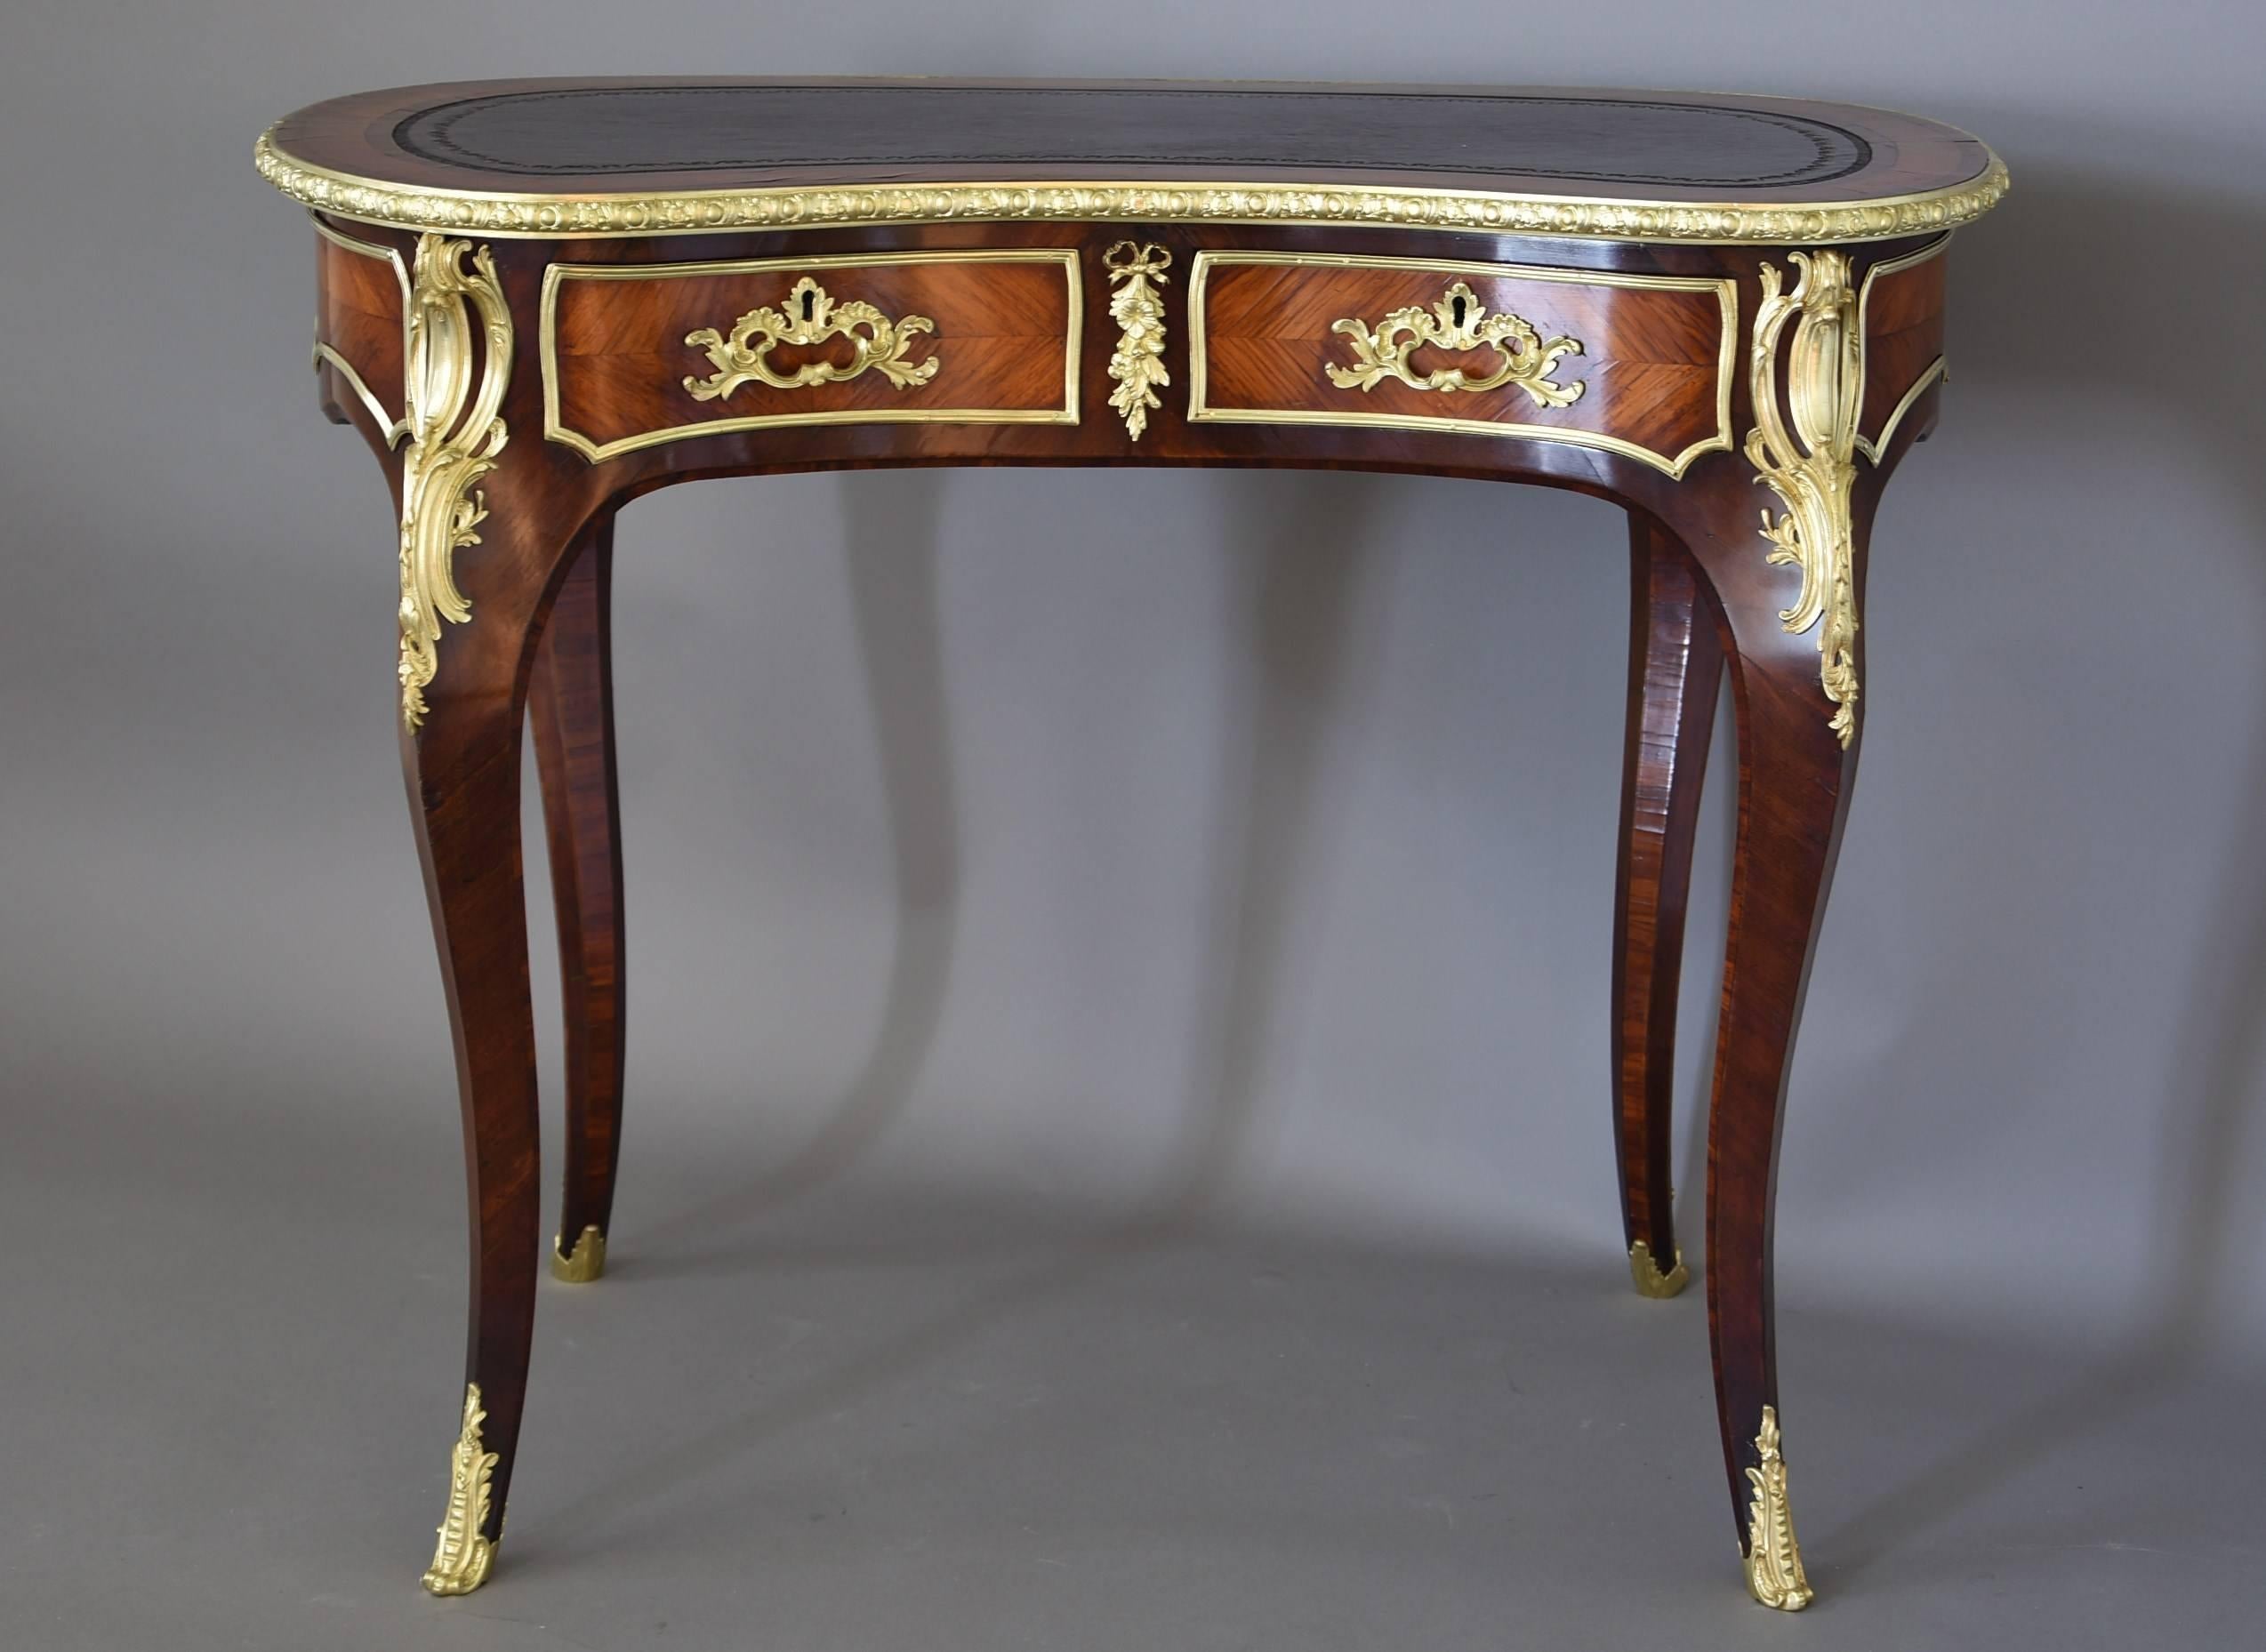 19th Century Kingwood Freestanding Kidney Shaped Ladies Writing Table In Good Condition For Sale In Suffolk, GB